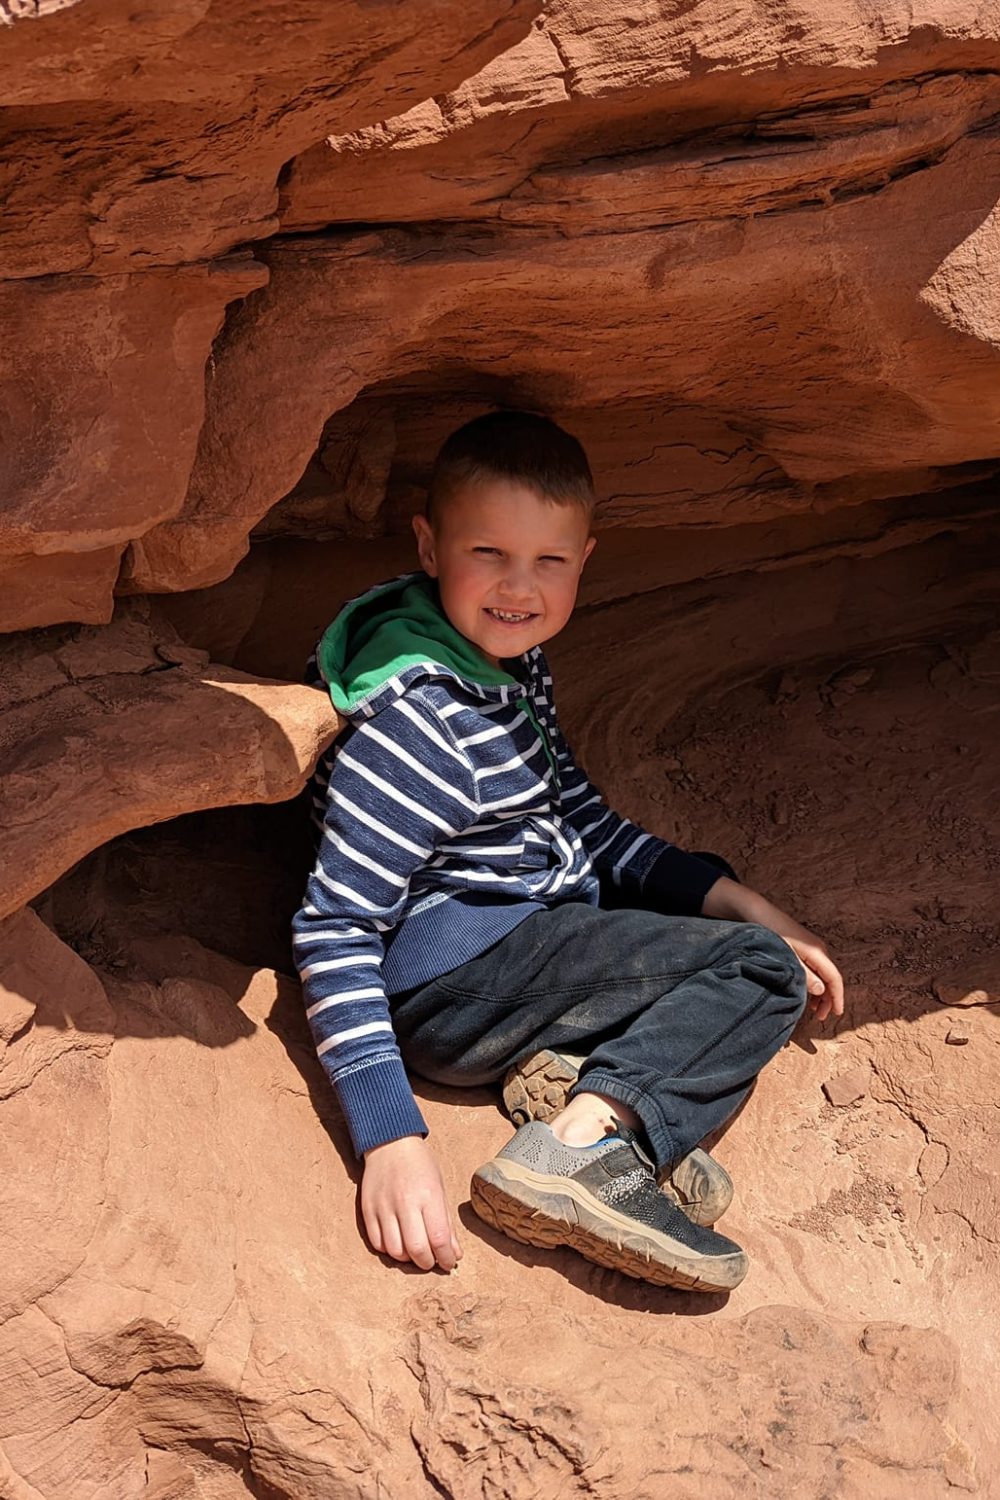 Tyler playing in one of the many "cubbies" on the Hickman Bridge Trail in Capitol Reef National Park.